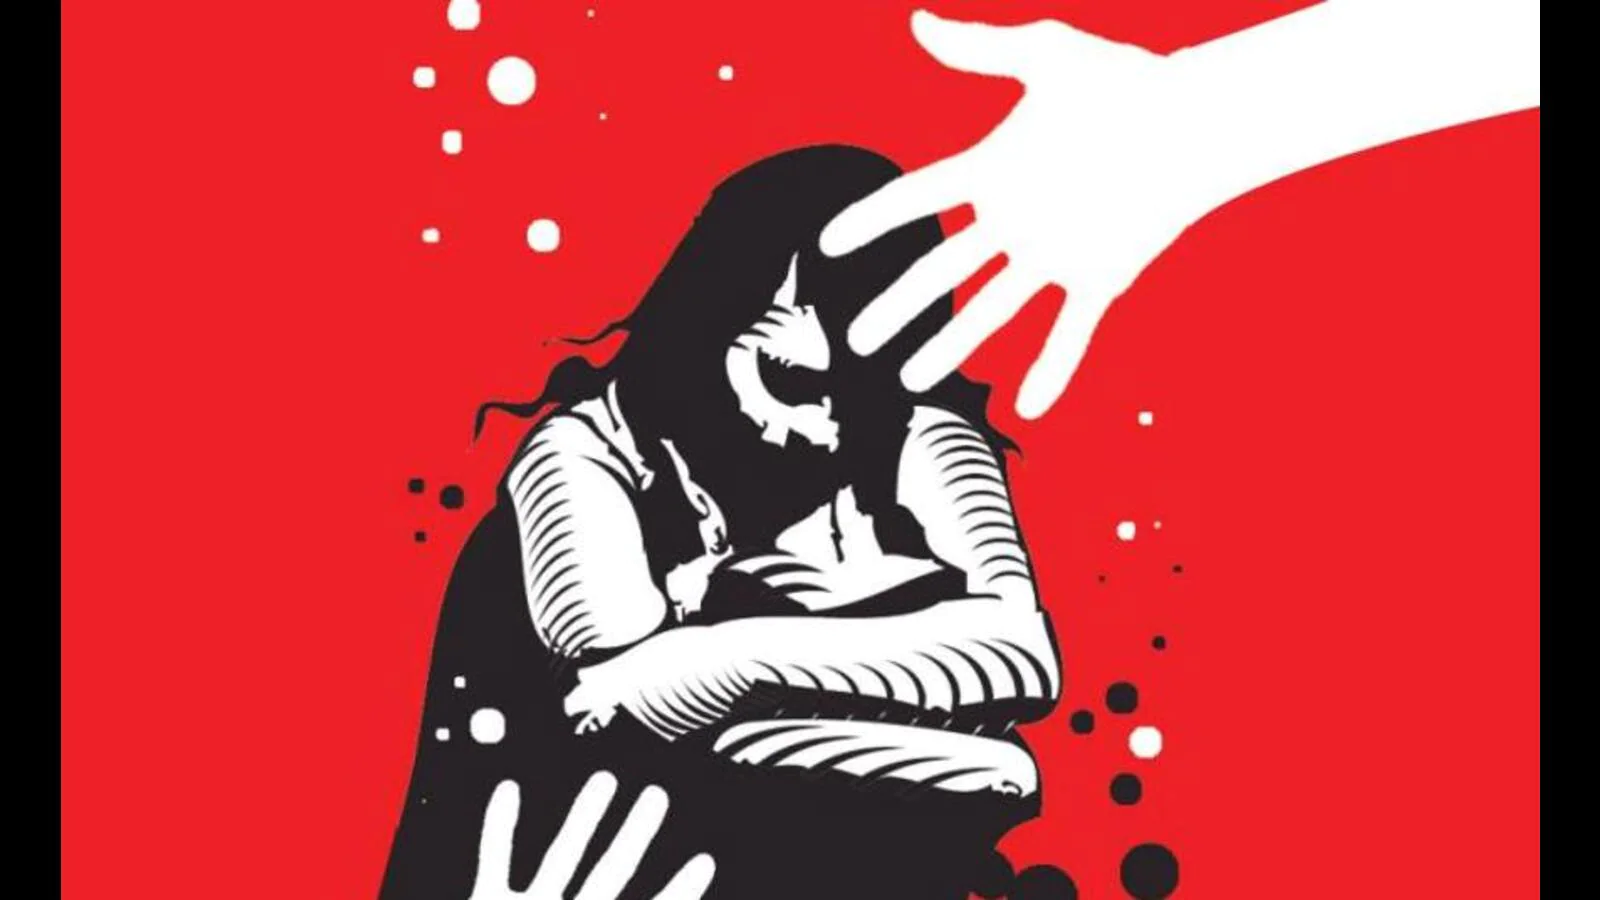 Ludhiana | Tailor arrested for sexually assaulting minor cousin